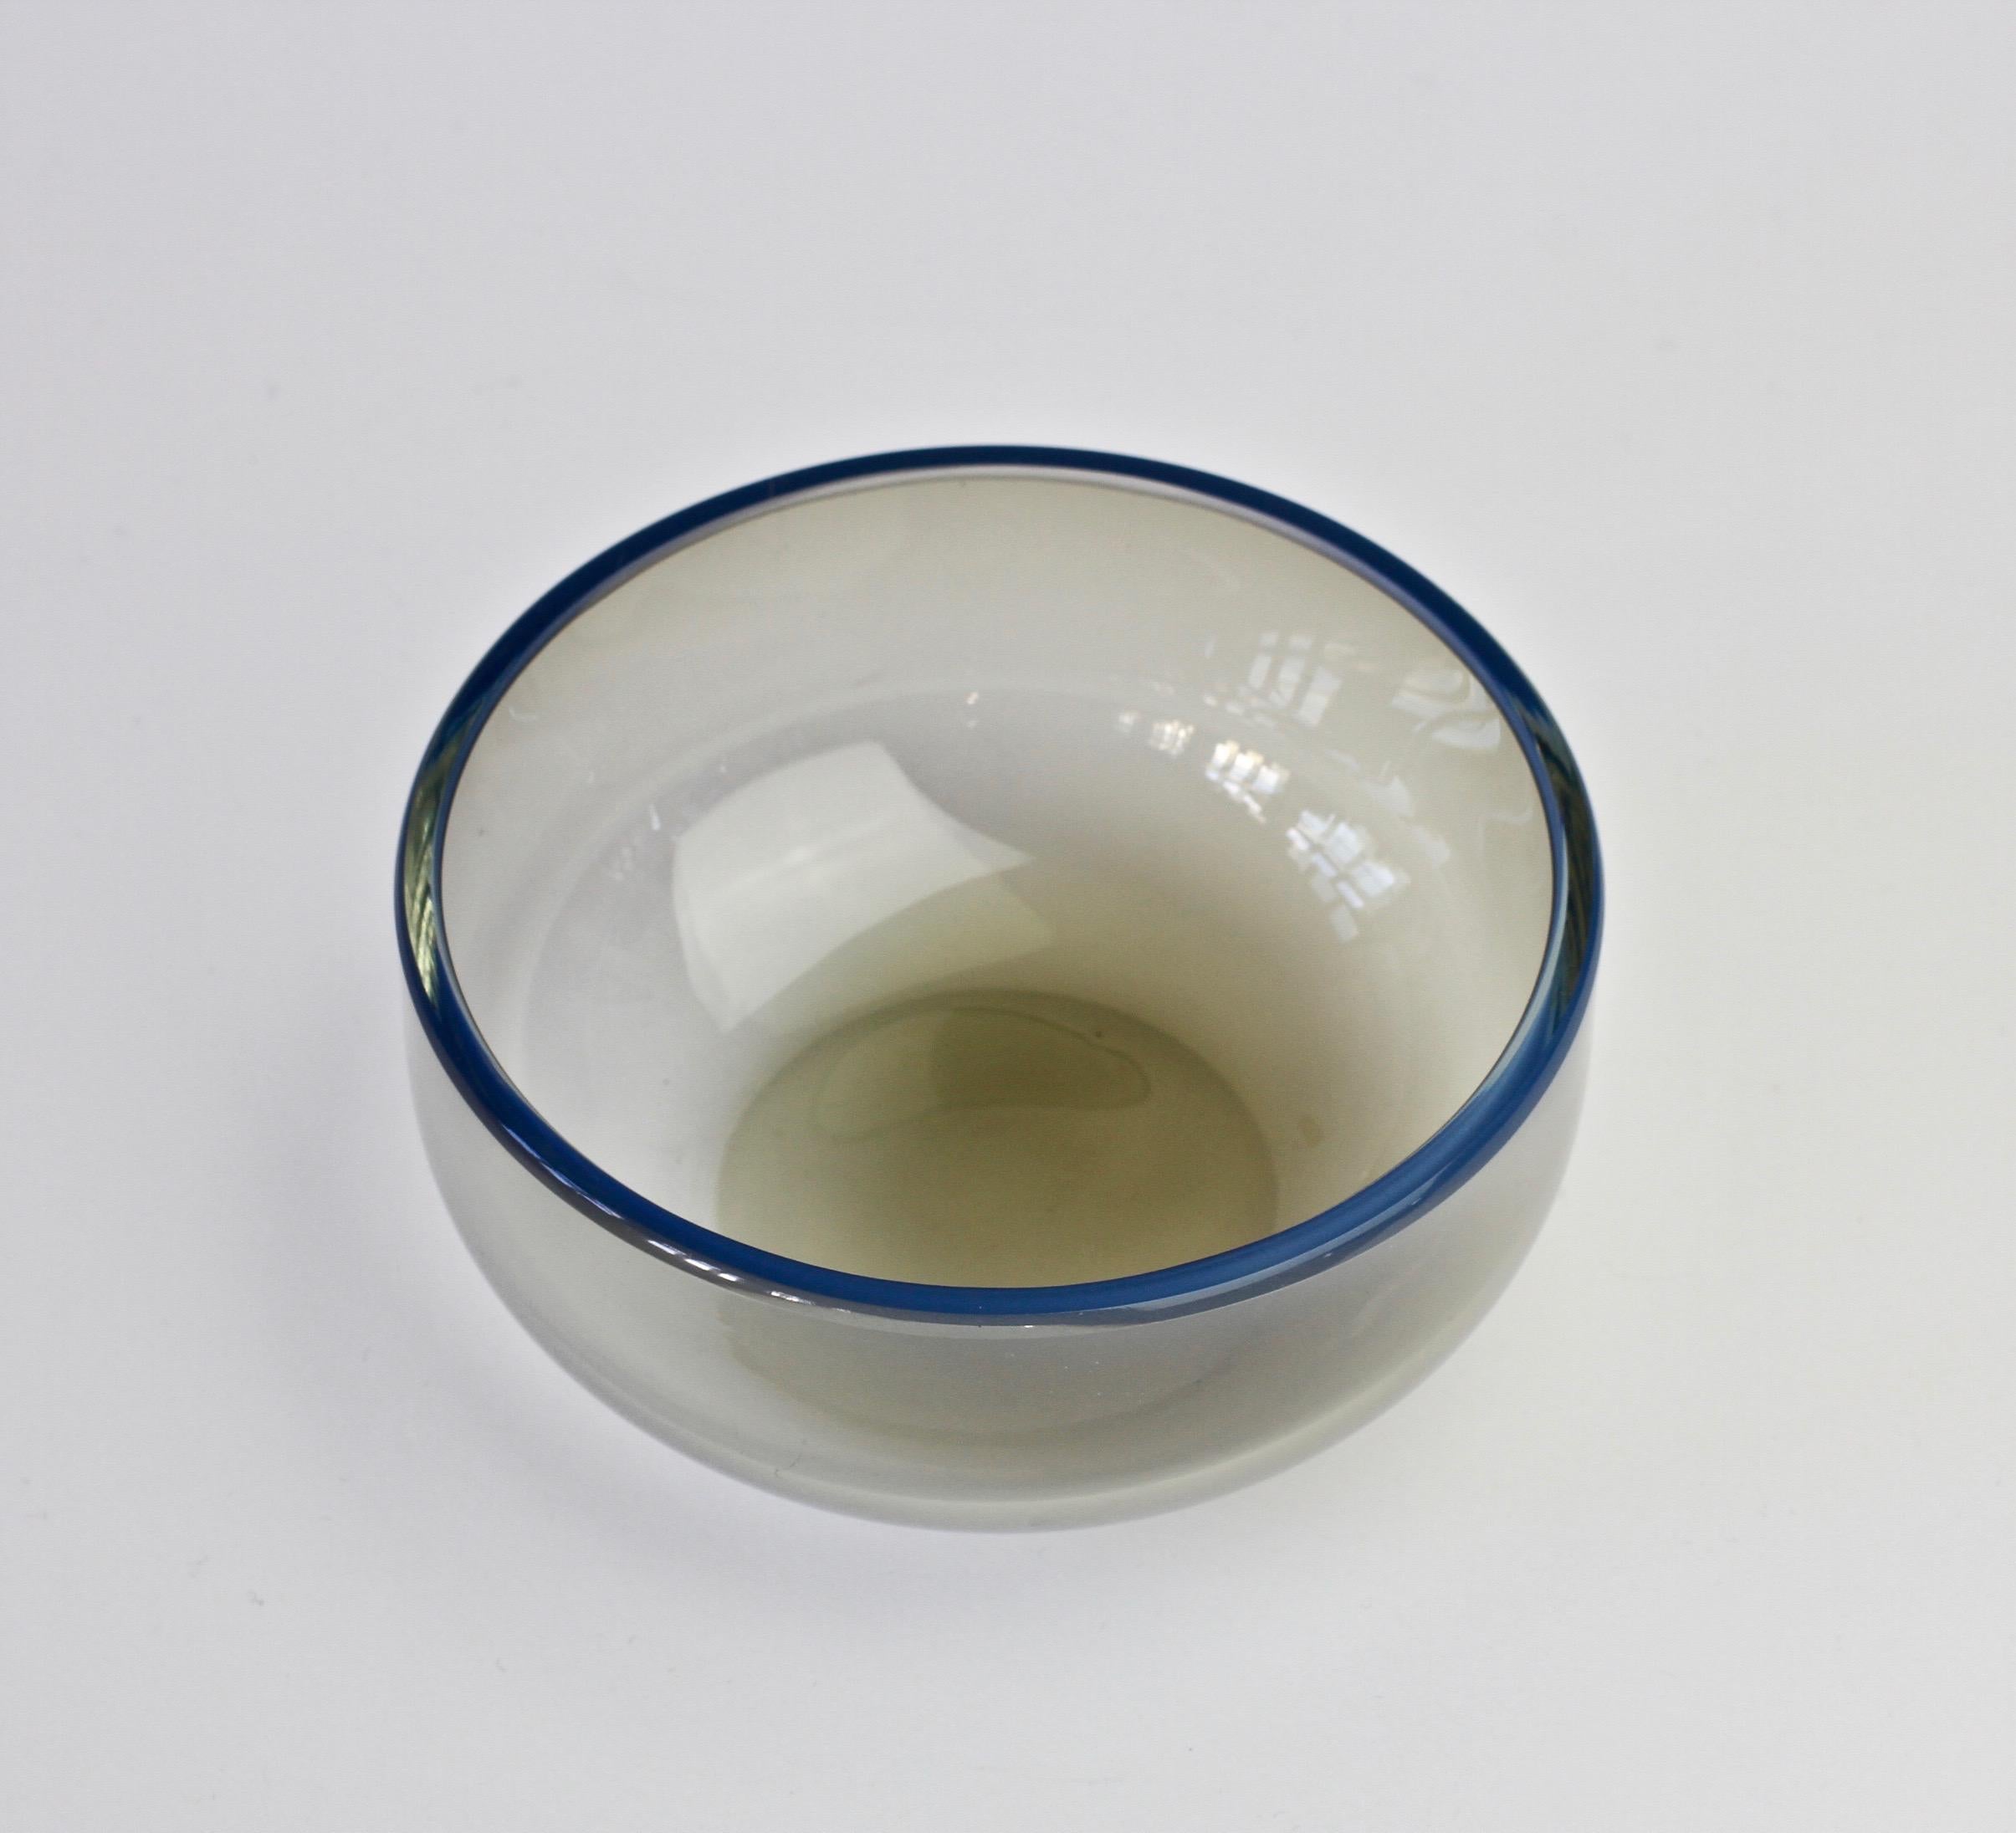 Single midcentury, vintage 'Opalino' Murano glass bowl designed by Antonio da Ros (1936-2012) for Cenedese, circa 1970-1990. Wonderful translucent color of 'smoked mushroom' gray (grey) with a secondary layer of blue glass. Simplistic yet elegant